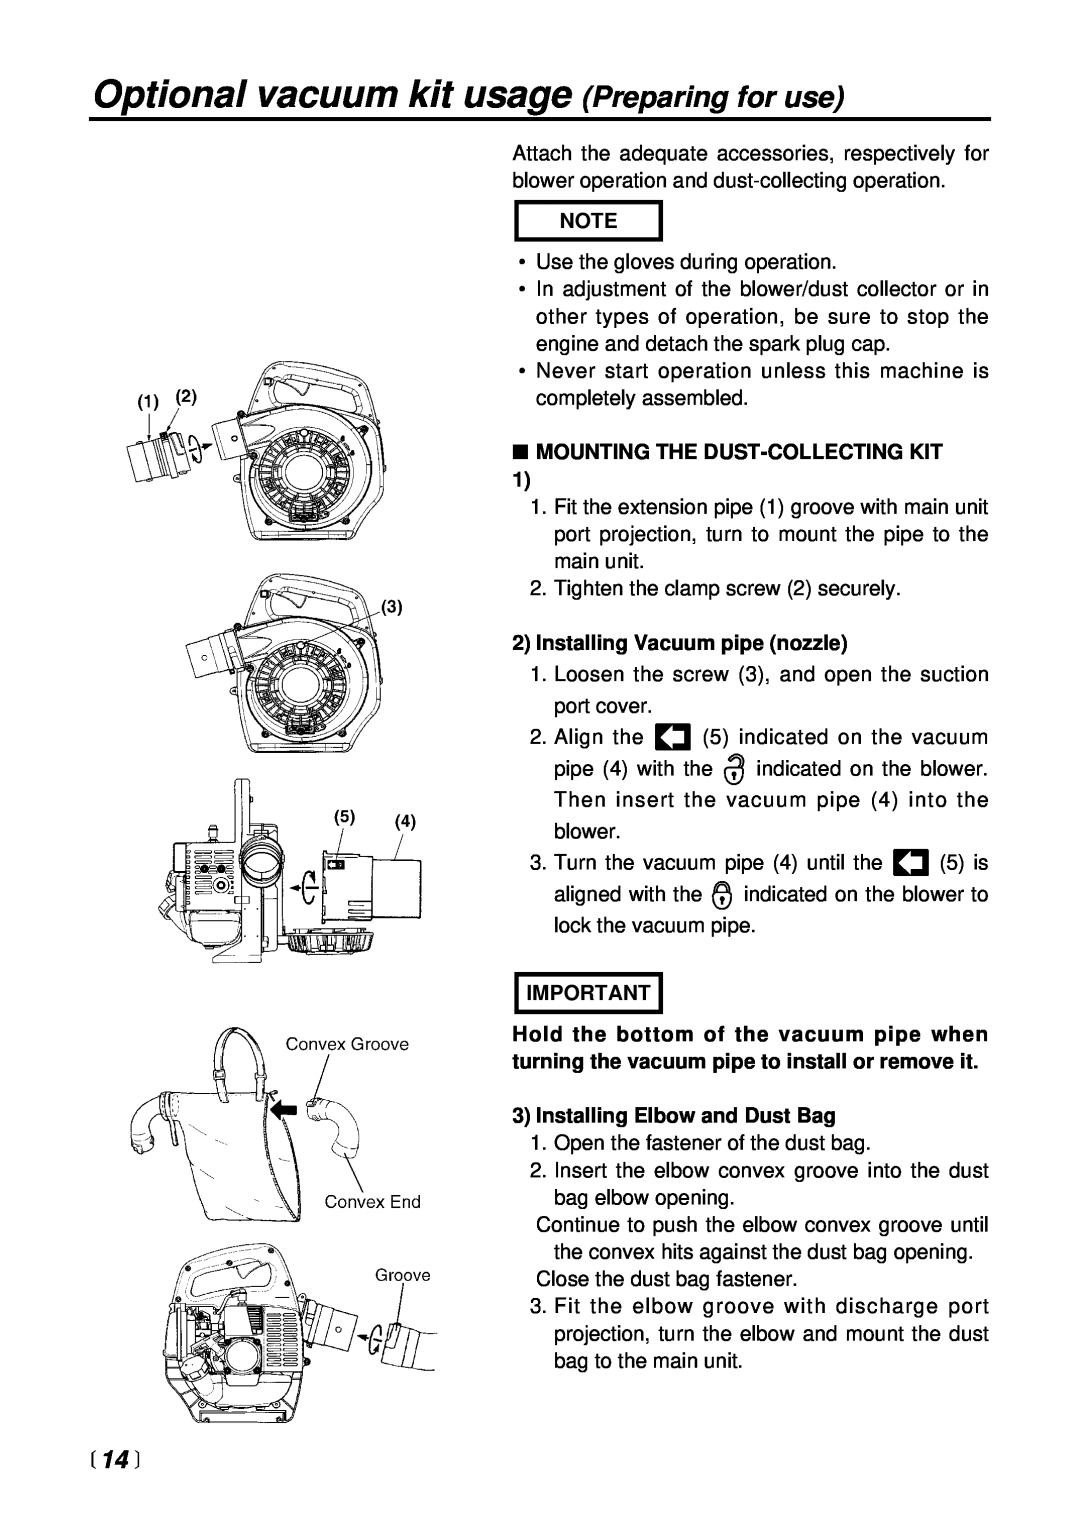 RedMax HBZ2600 manual Optional vacuum kit usage Preparing for use, 14 , Mounting The Dust-Collectingkit 